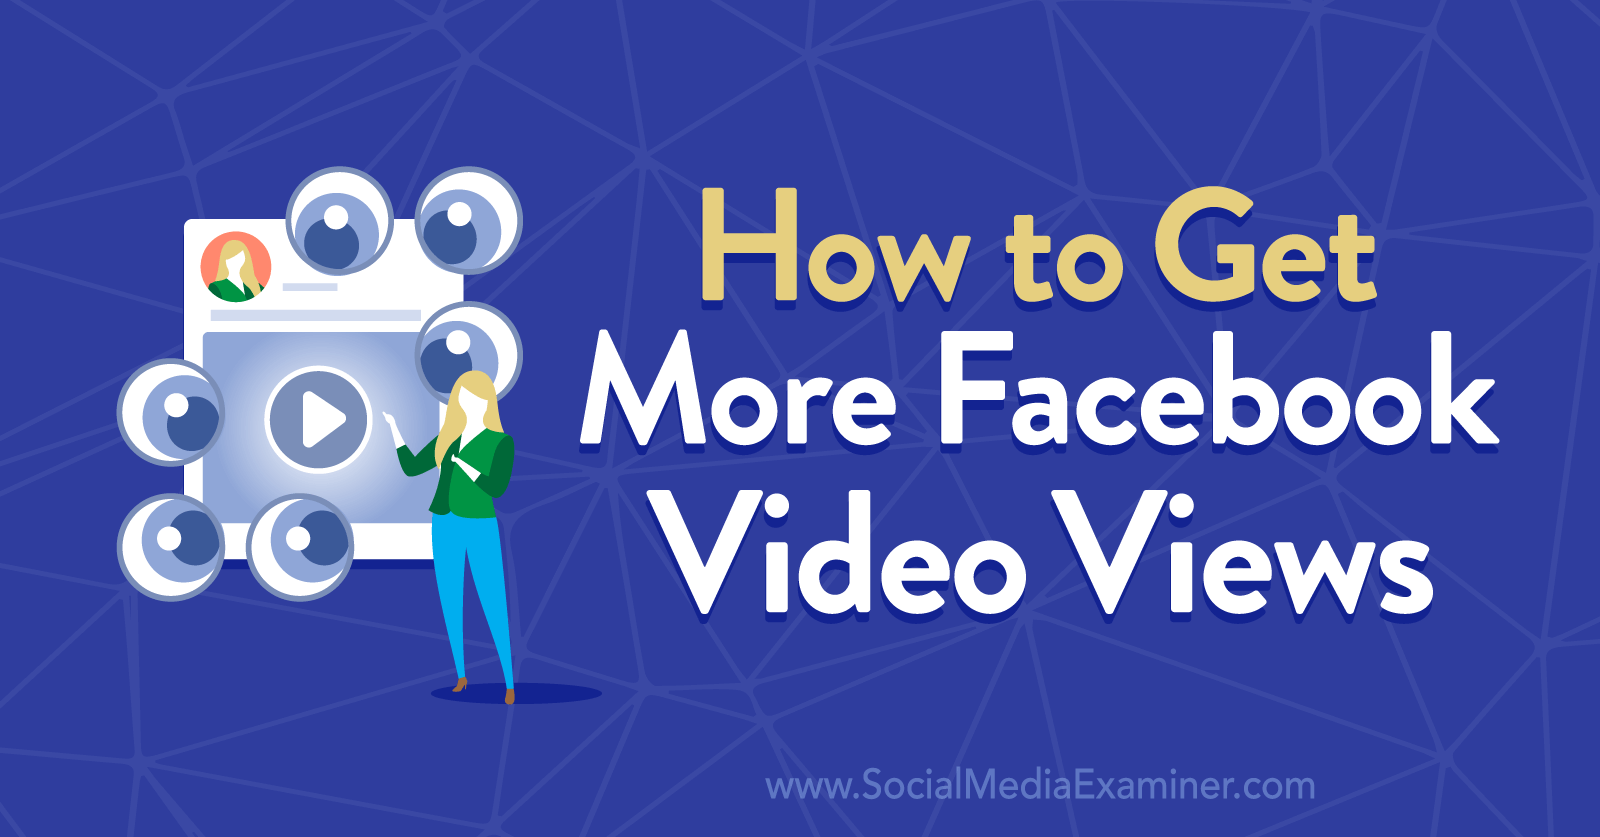 How to Get More Facebook Video Views by Anna Sonnenberg on Social Media Examiner.